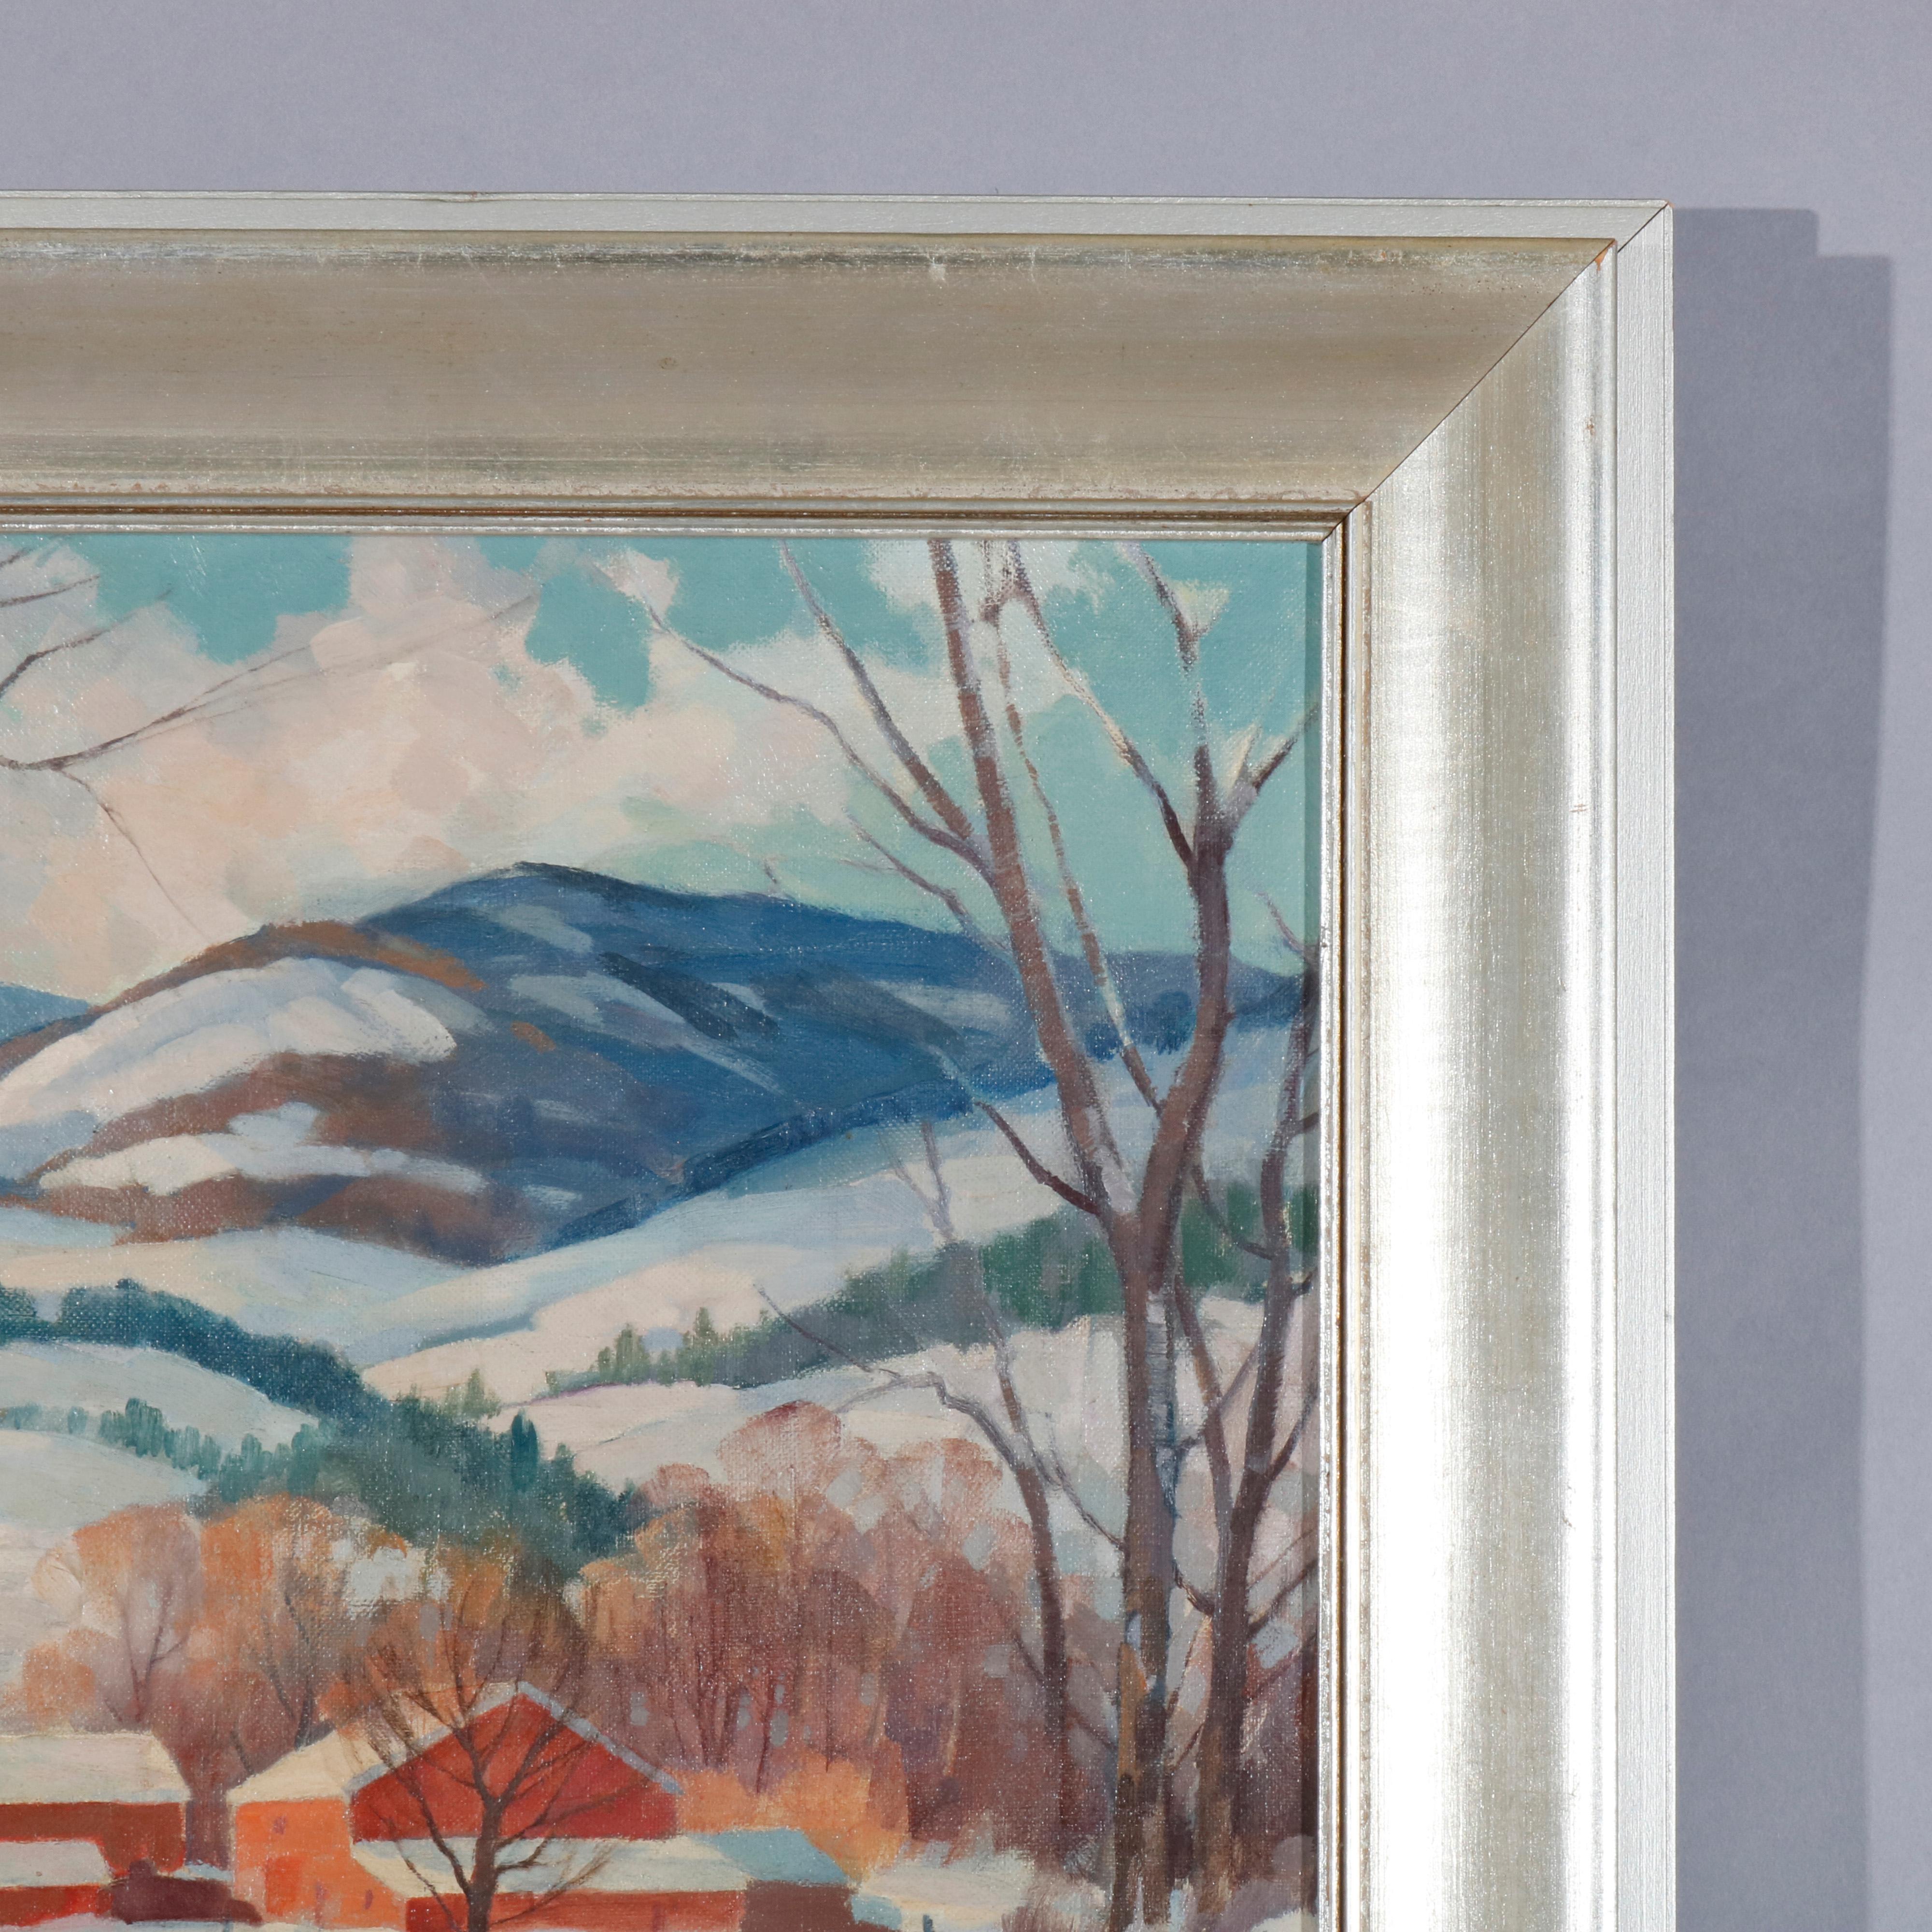 Hand-Painted Clifford Ulp Oil on Canvas Landscape Painting, Winter Village Scene, circa 1940